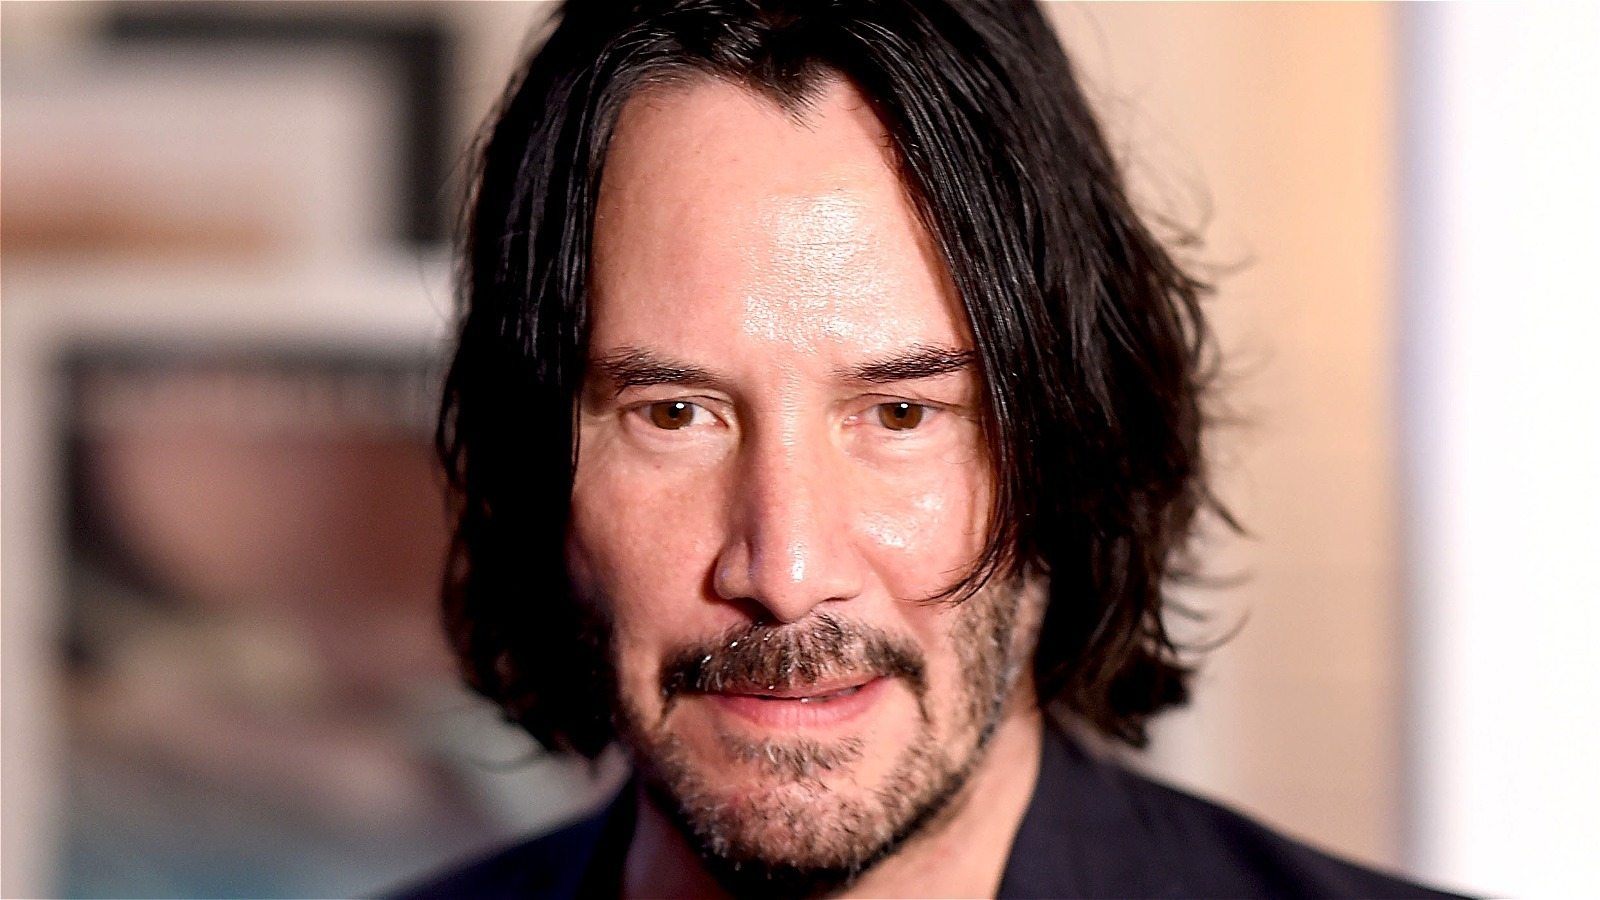 Keanu Reeves Finally Confirms What We Suspected All Along About The Sad Keanu Meme